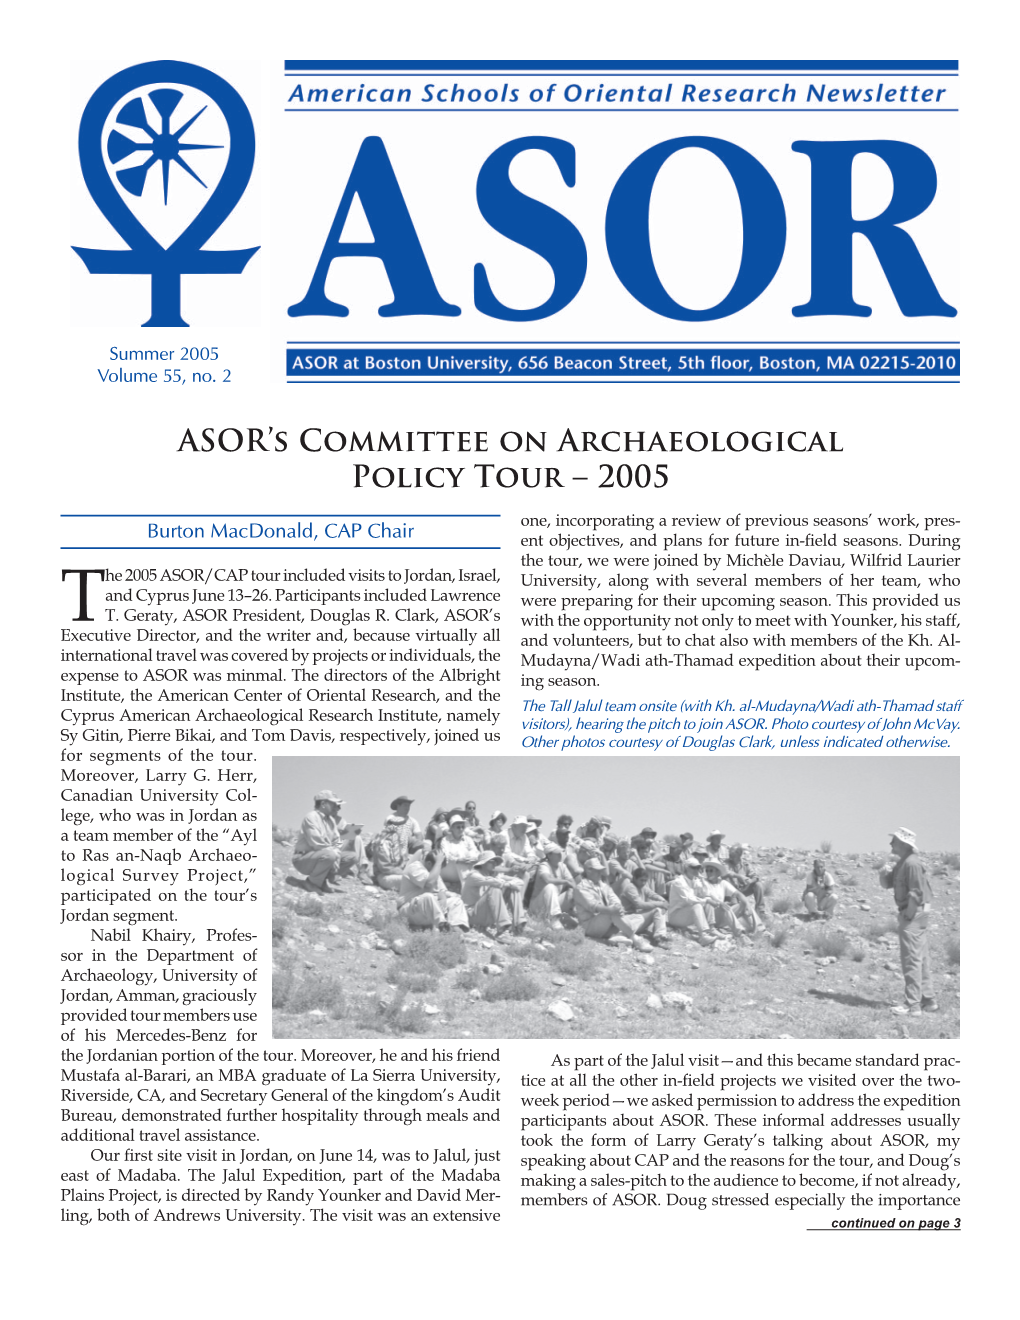 ASOR's Committee on Archaeological Policy Tour